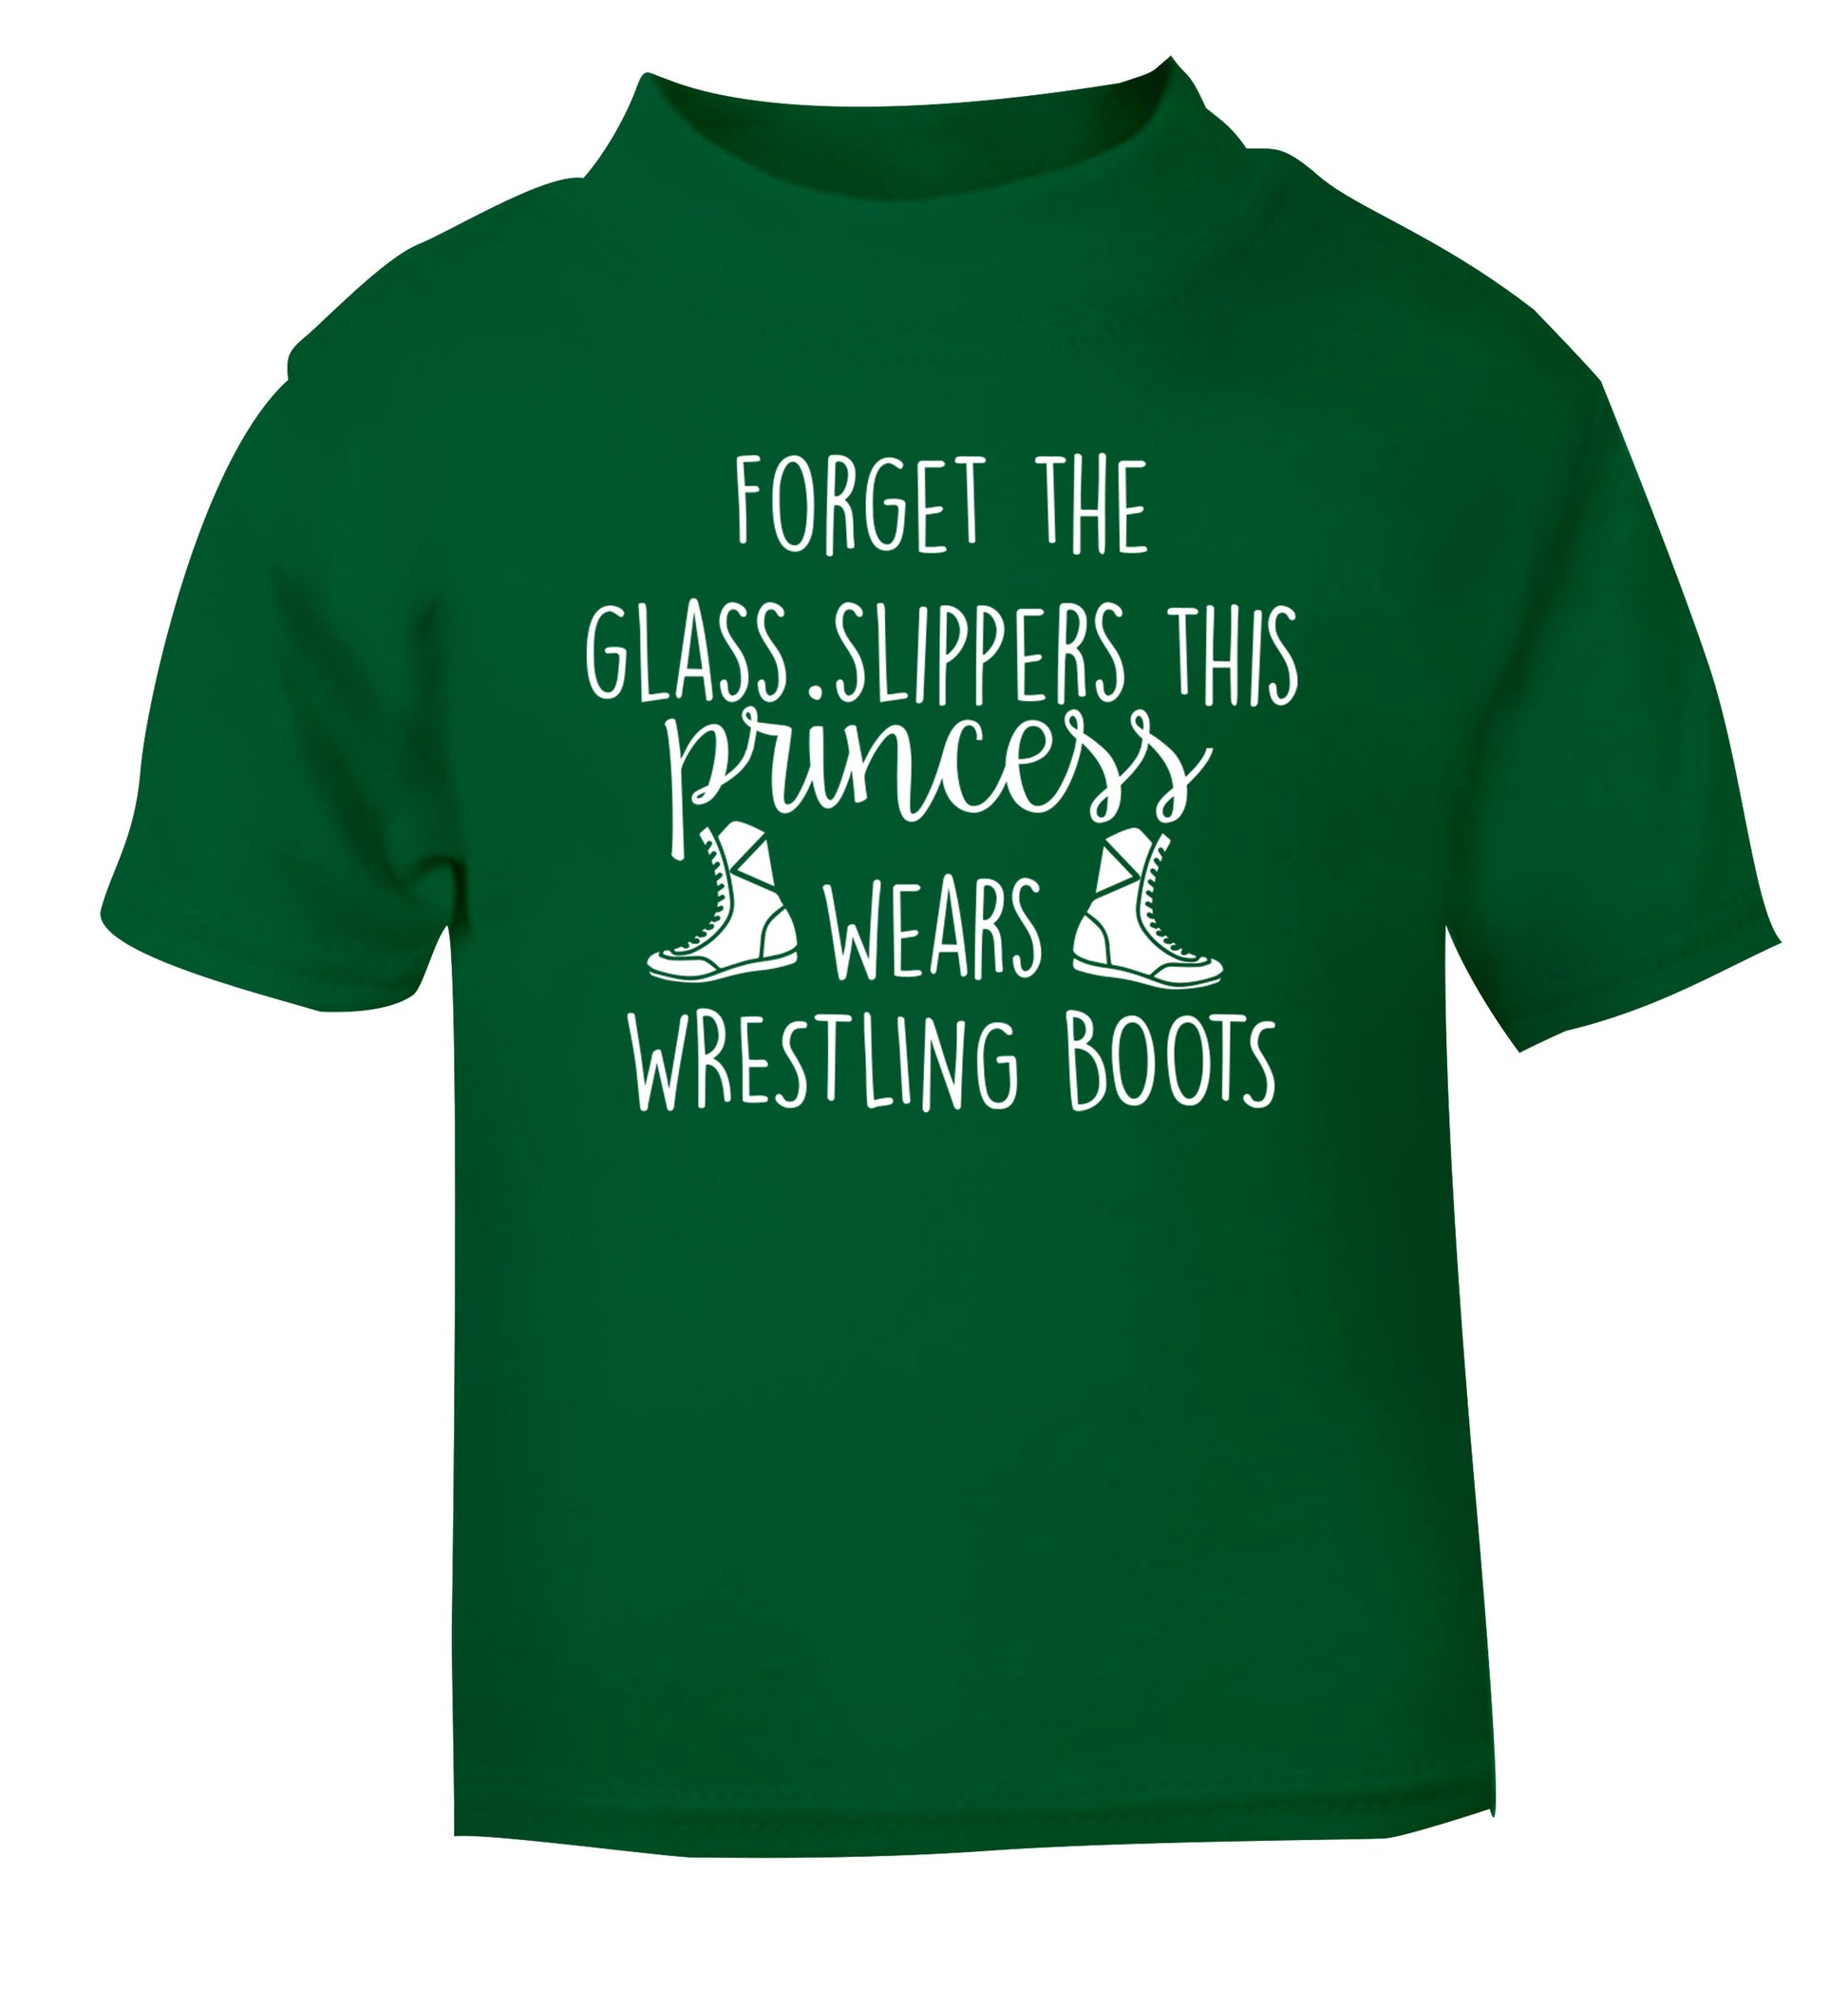 Forget the glass slippers this princess wears wrestling boots green Baby Toddler Tshirt 2 Years